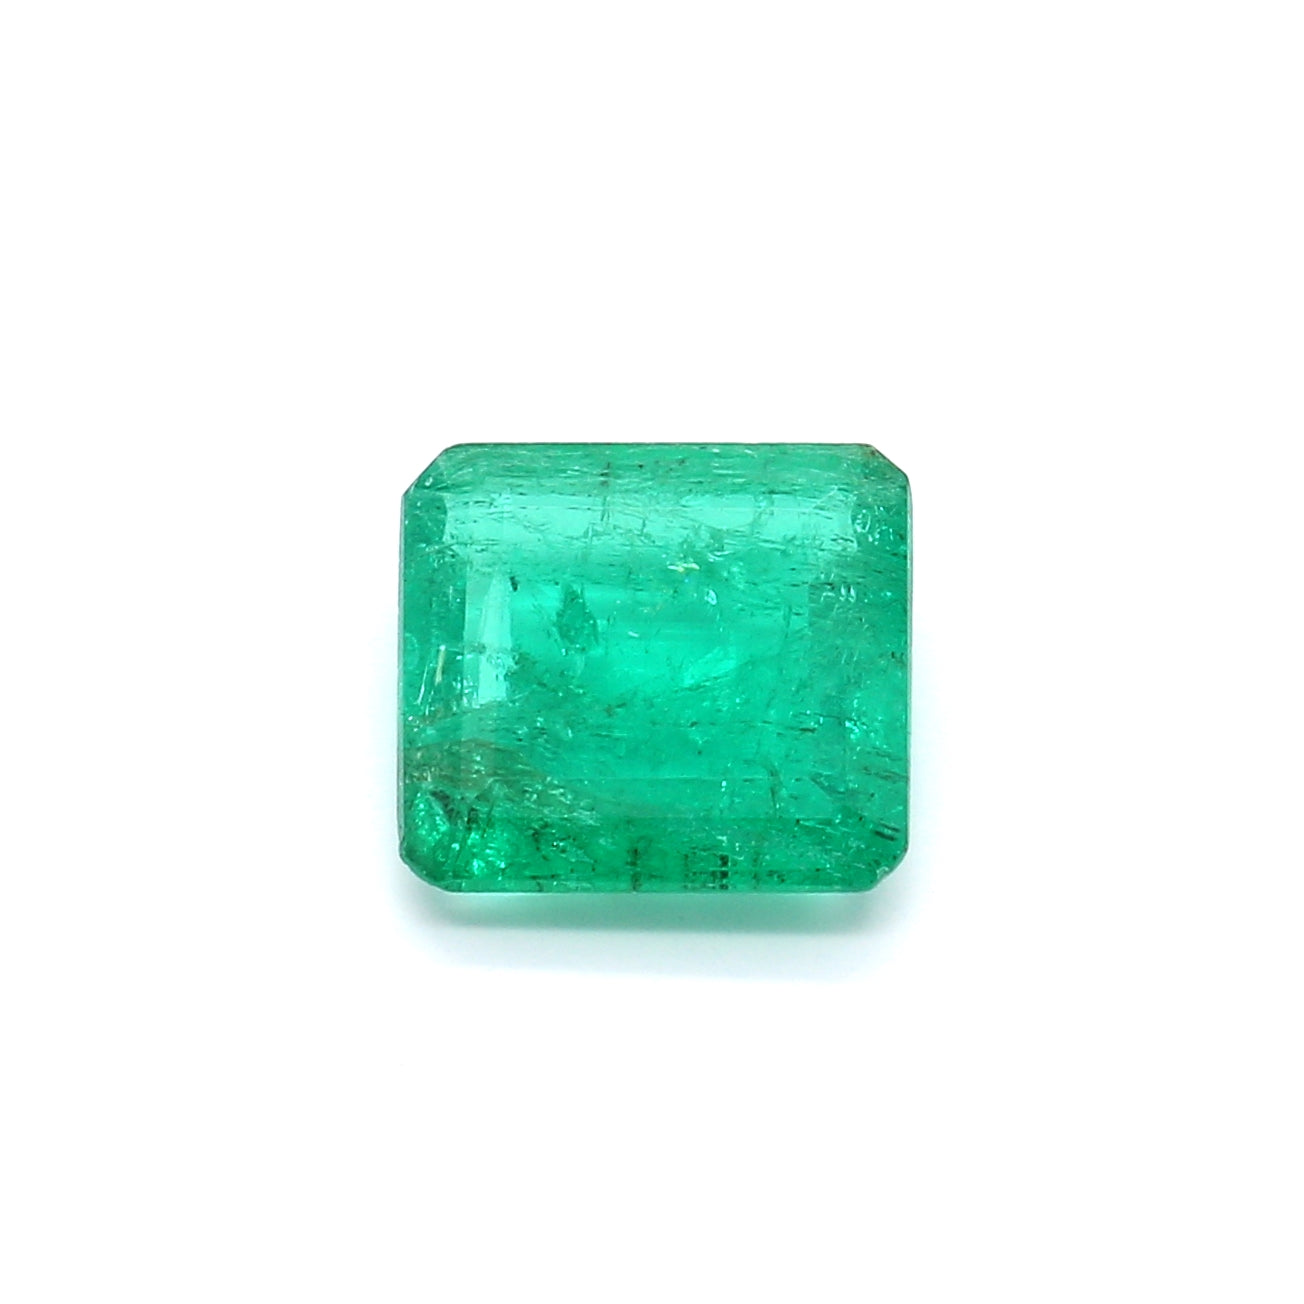 2.21ct Octagon Emerald, Moderate Oil, Colombia - 9.07 x 8.80 x 3.38mm